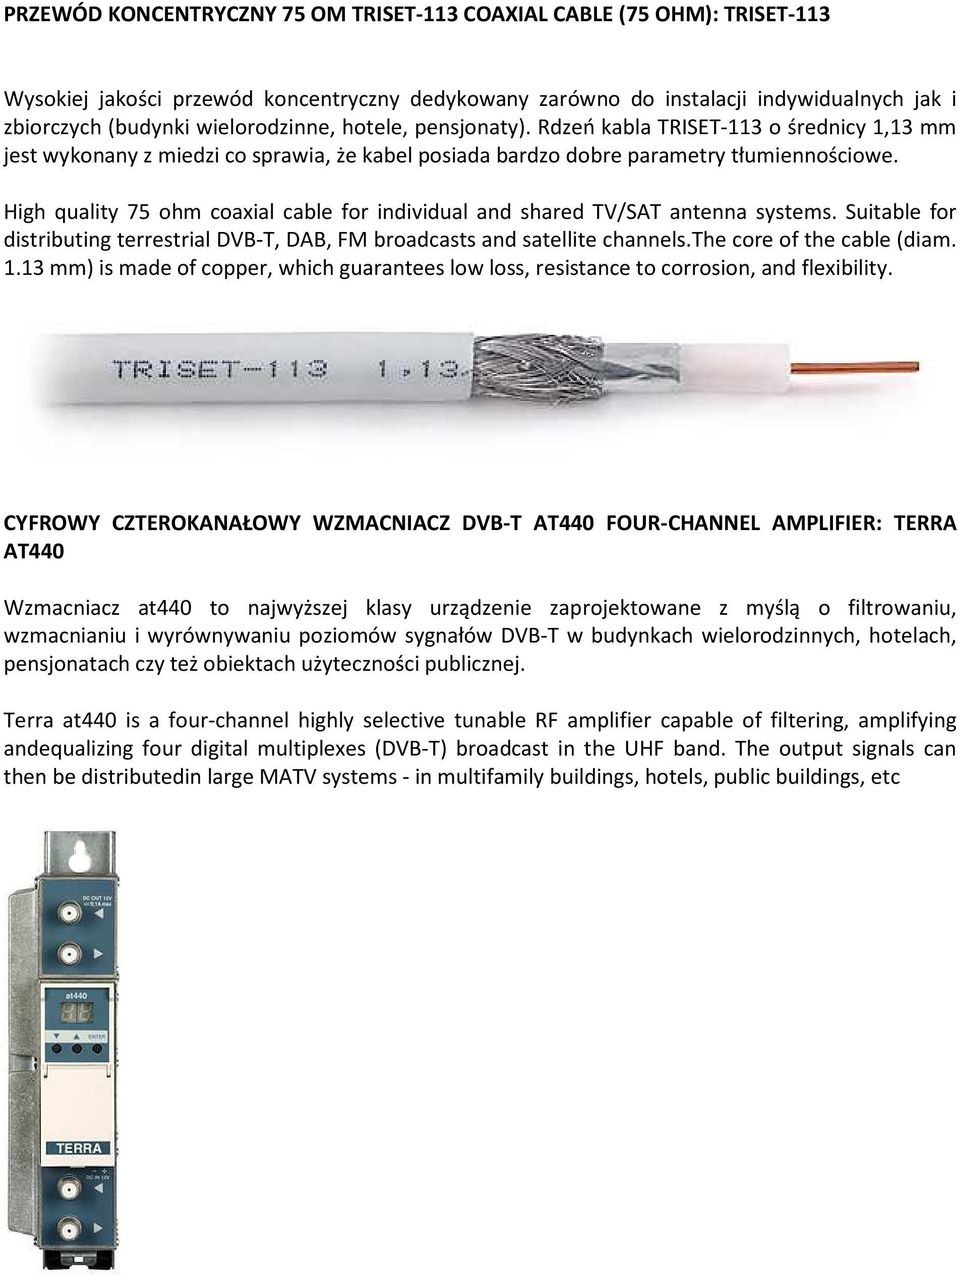 High quality 75 ohm coaxial cable for individual and shared TV/SAT antenna systems. Suitable for distributing terrestrial DVB-T, DAB, FM broadcasts and satellite channels.the core of the cable (diam.